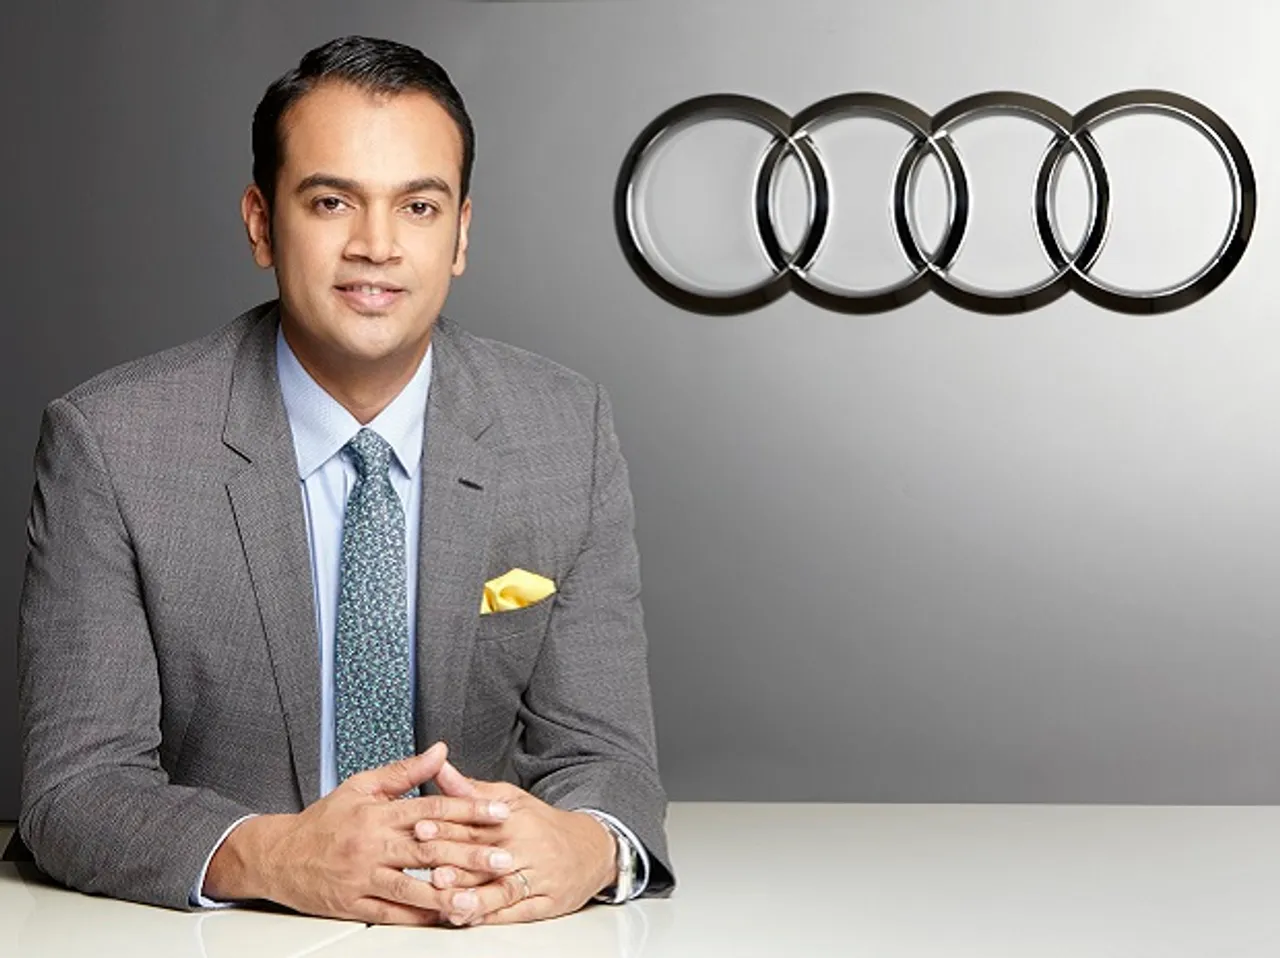 Audi is More Interested in Adding Value to Indian Consumers and Car Dealers